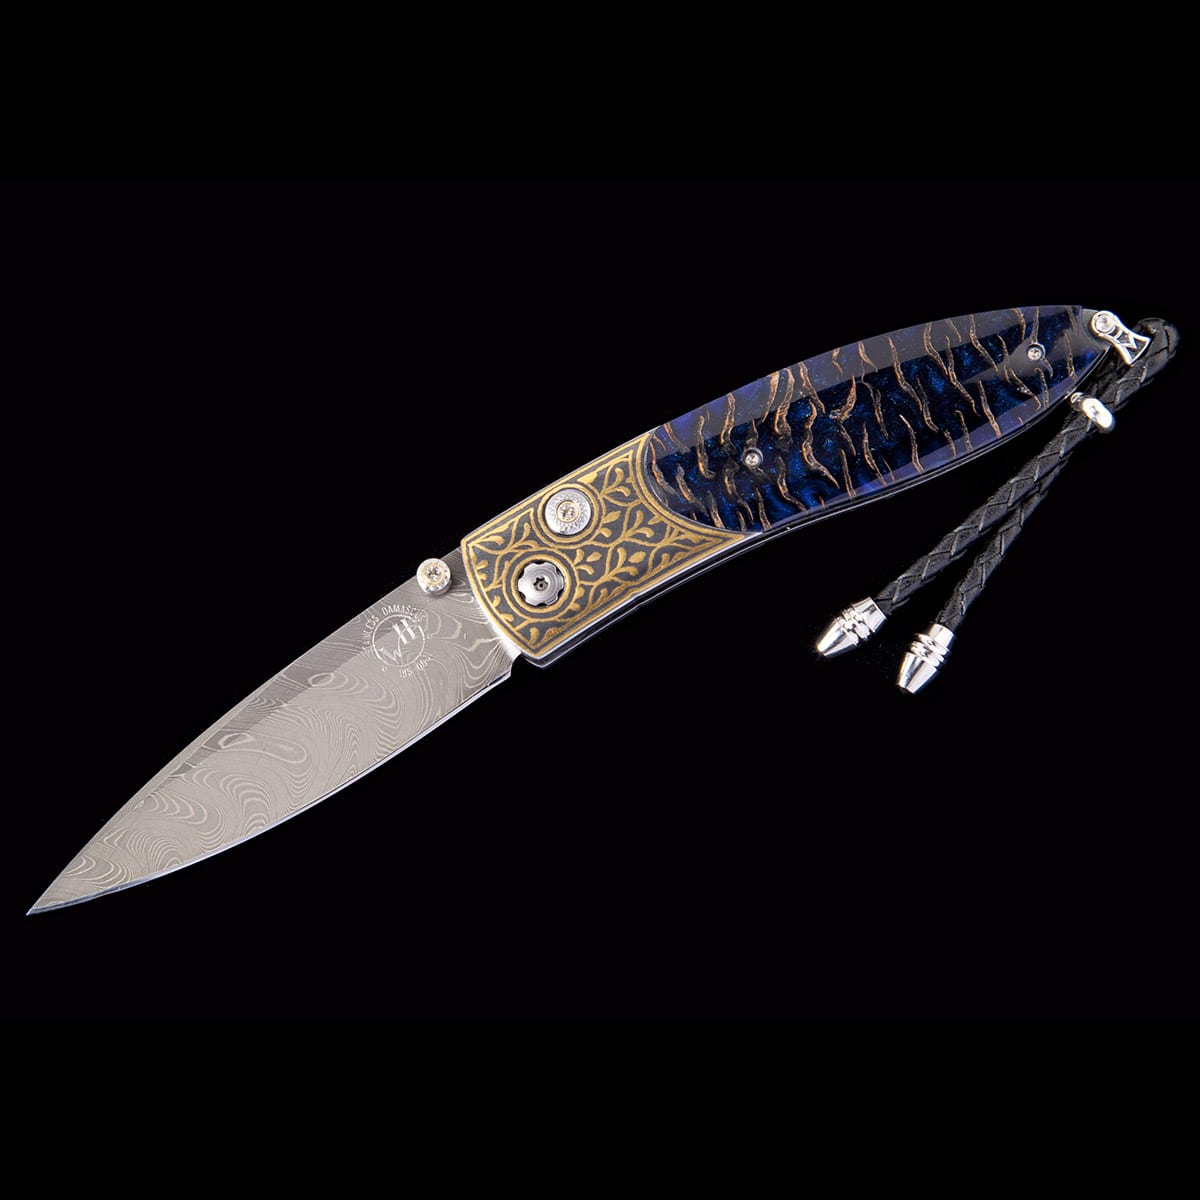 Monarch Golden Scale Knife by William Henry Studio